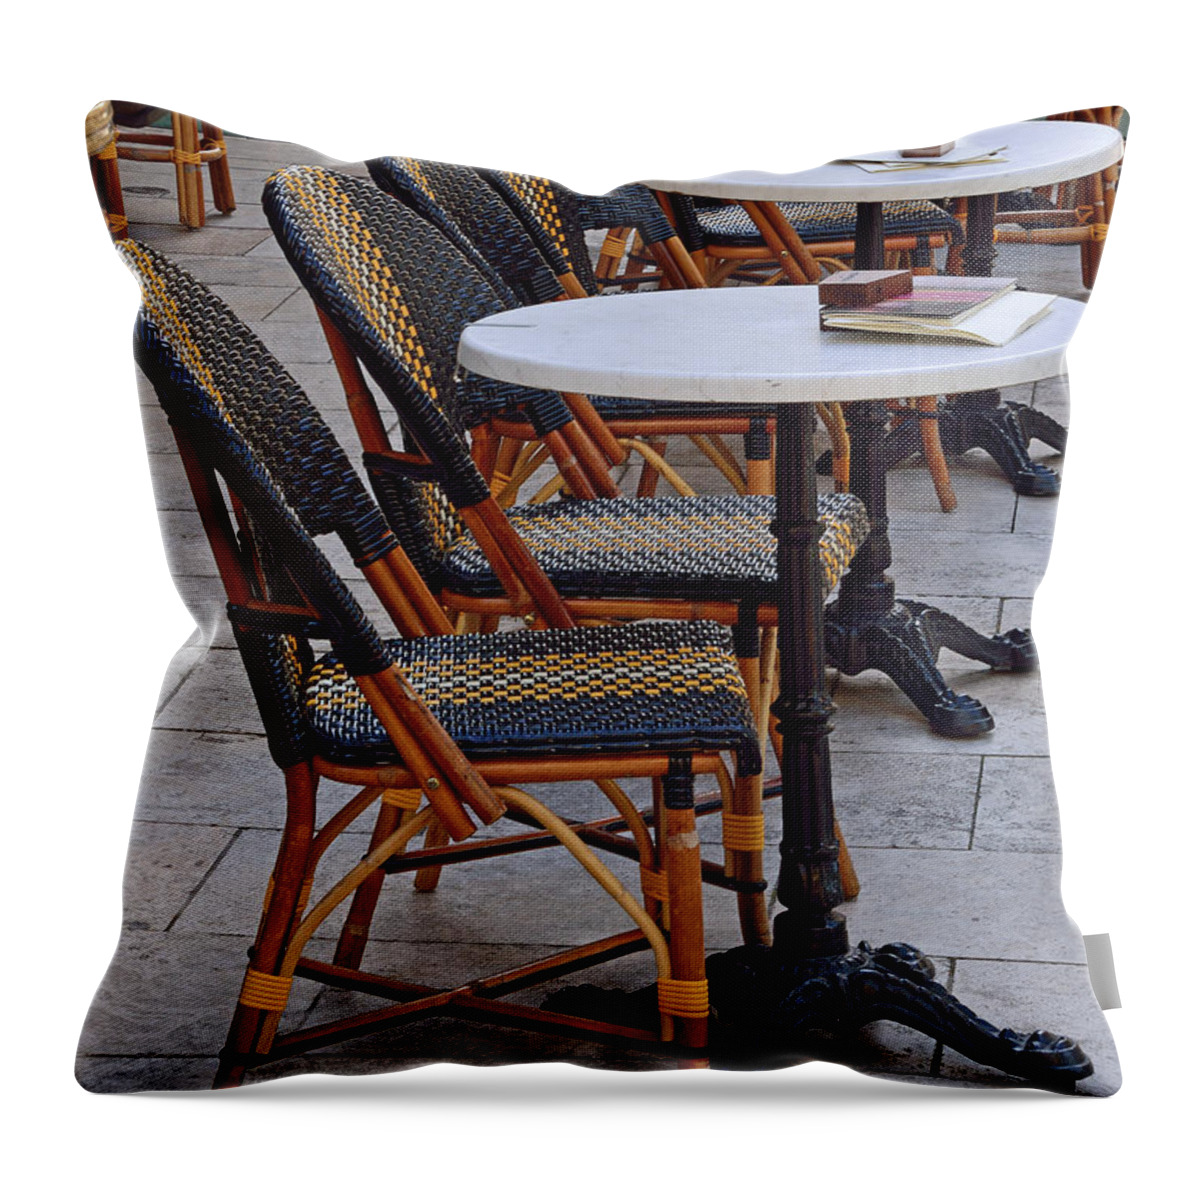 Budapest Throw Pillow featuring the photograph Budapest Cafe Chairs by Kathy Yates